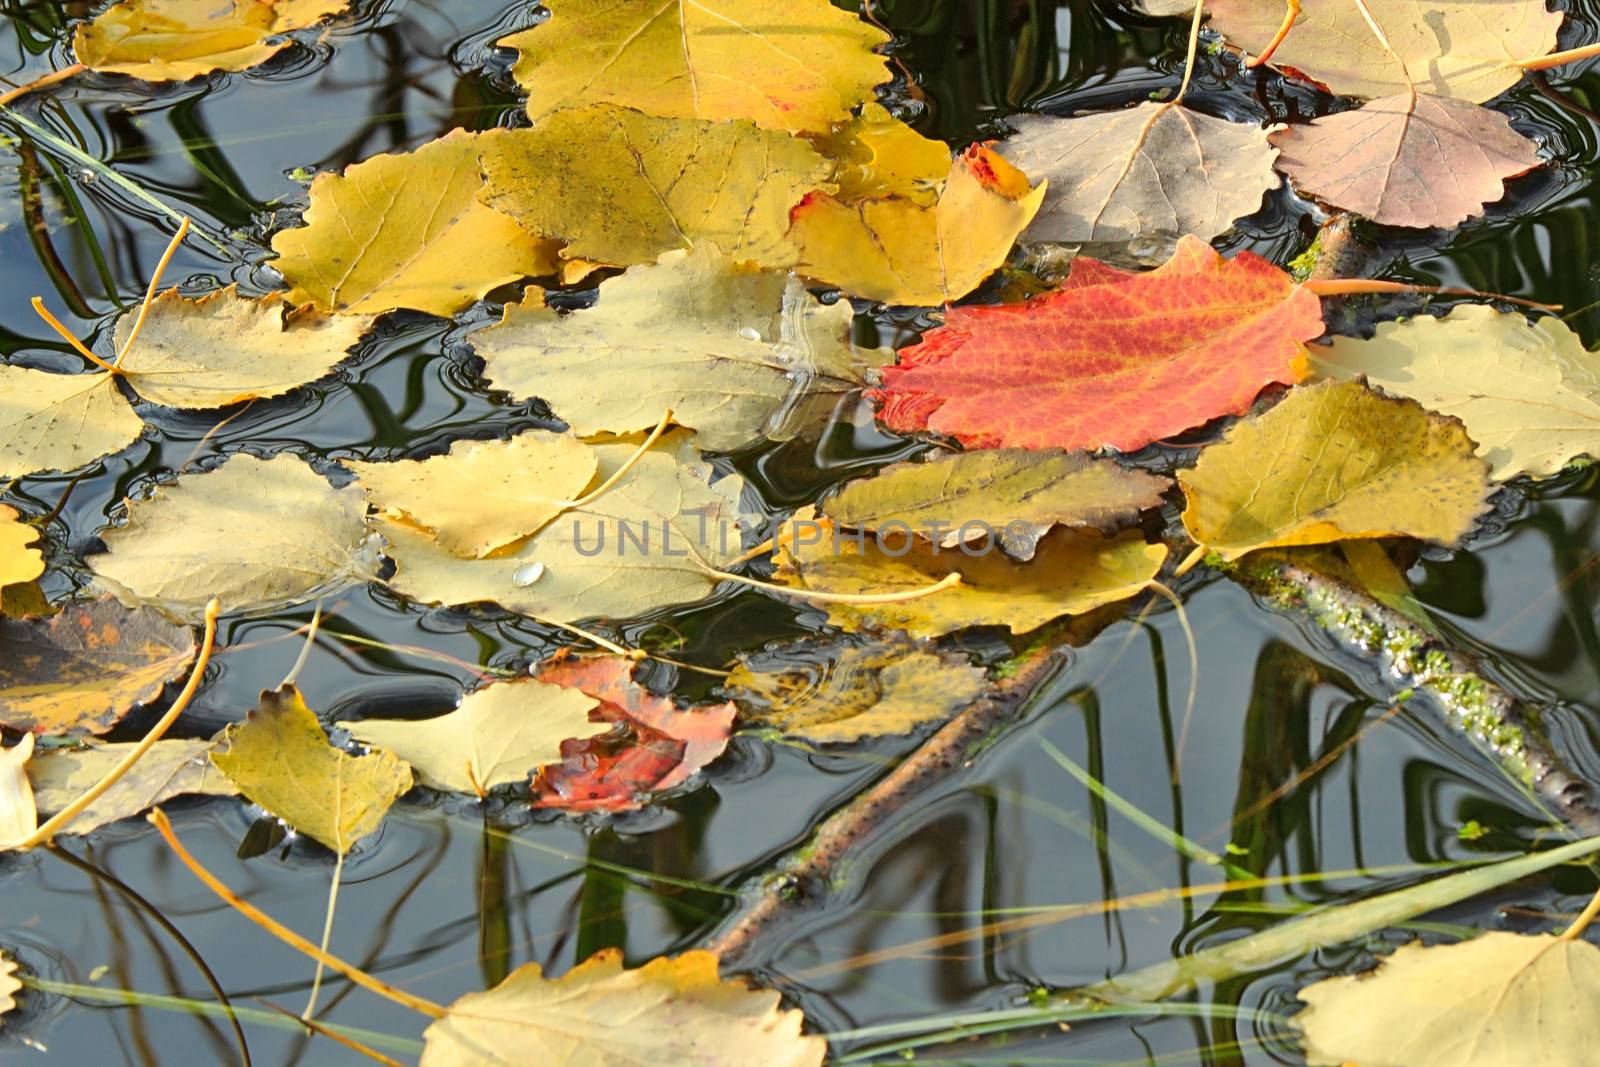 Autumn leaves, fallen from the trees on the shore of the lake lie on the surface of the water.
